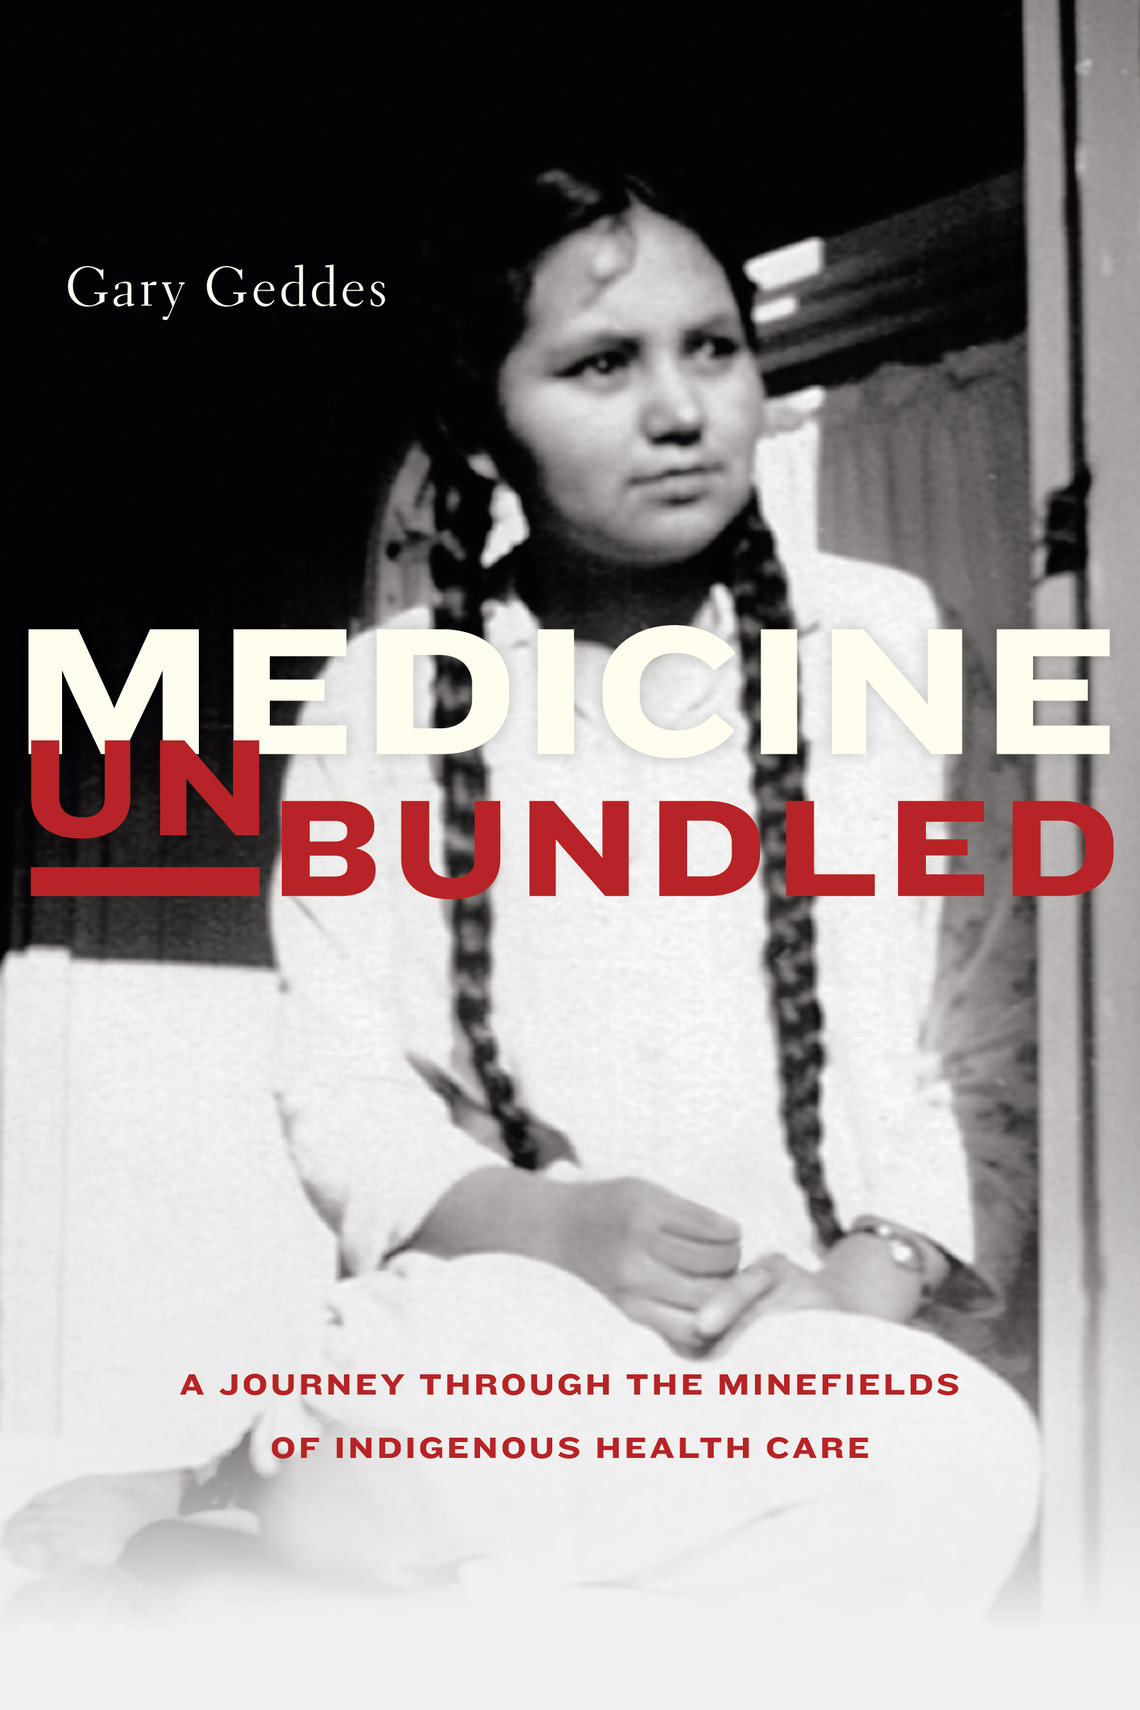 Medicine Unbundled: A Journey Through the Minefields of Indigenous Health Care (Heritage House)